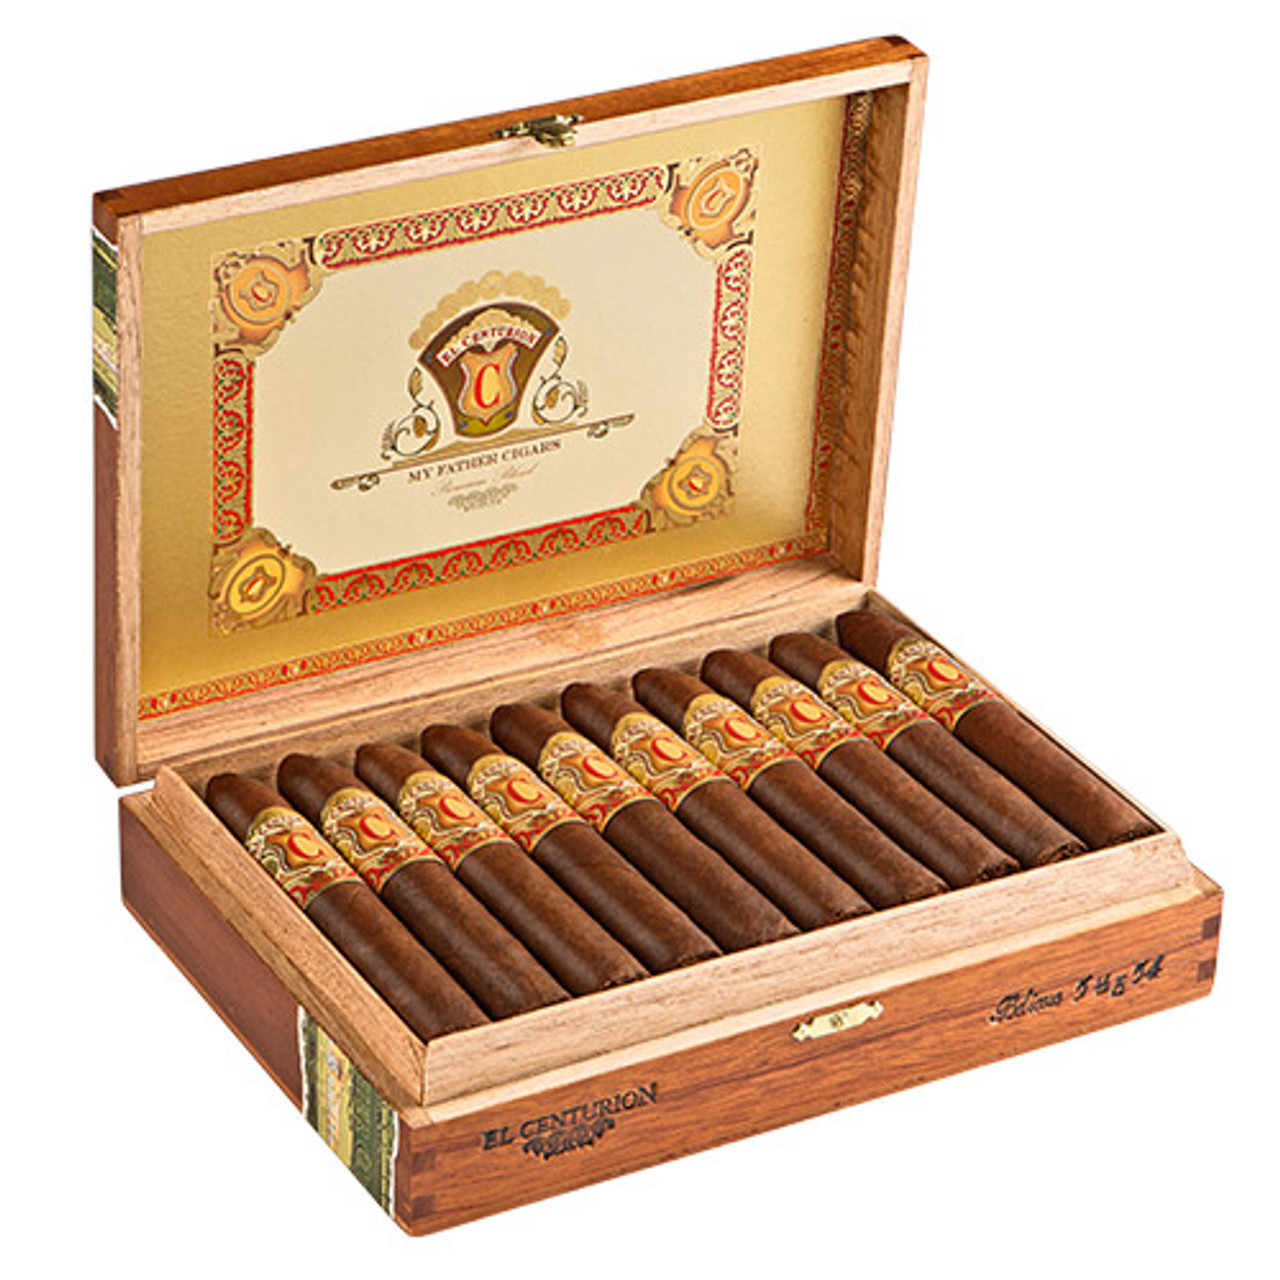 My Father El Centurion Belicoso Cigars - 5.5 x 54 (Box of 20)